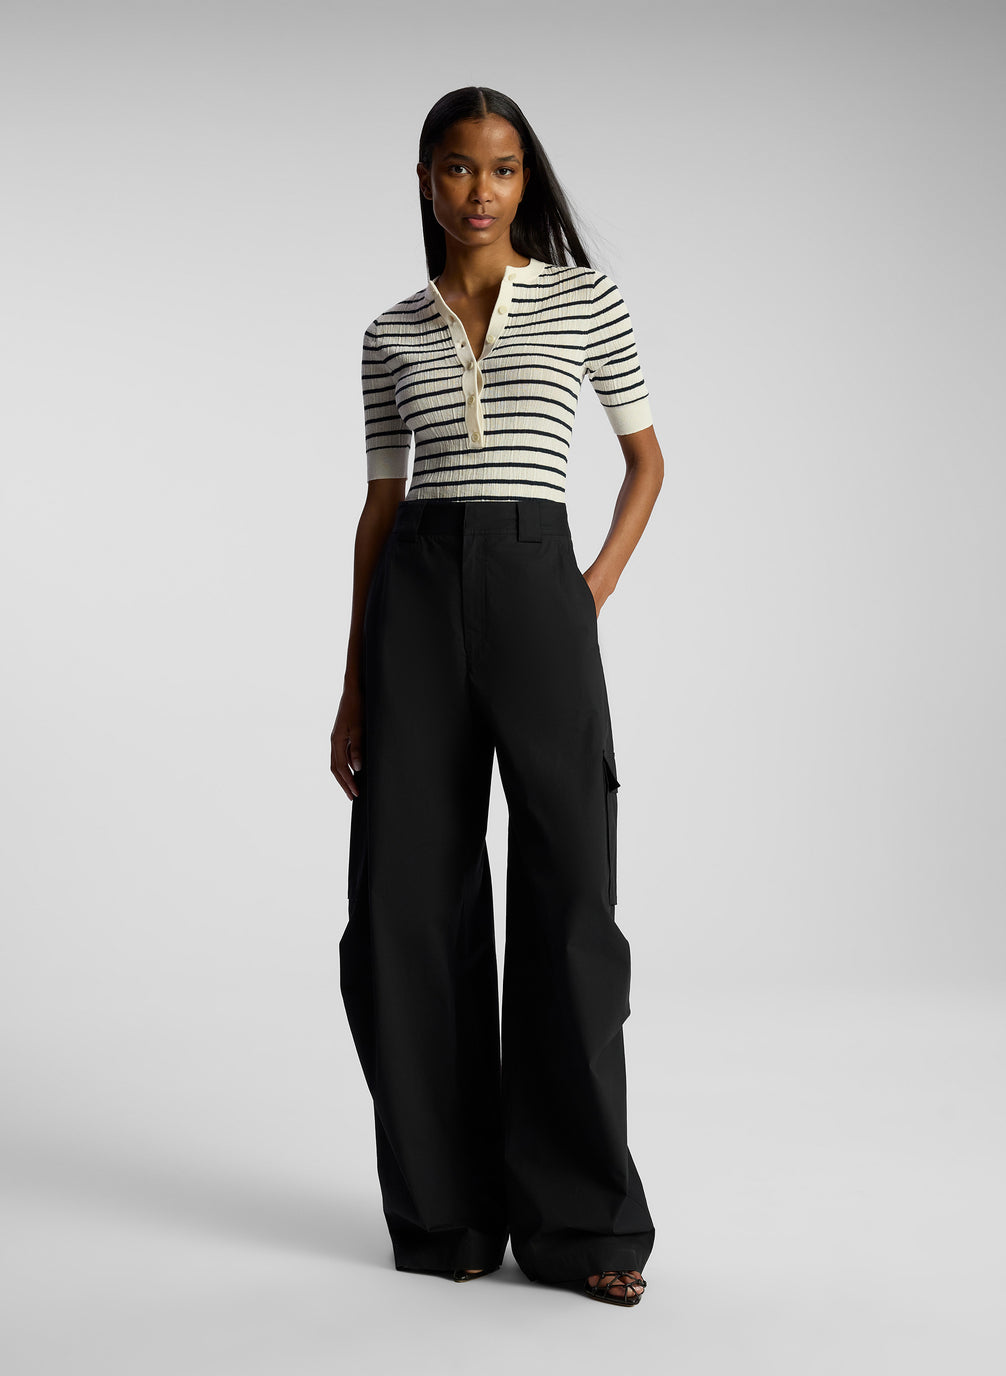 front view of woman wearing striped top and black cargo pants